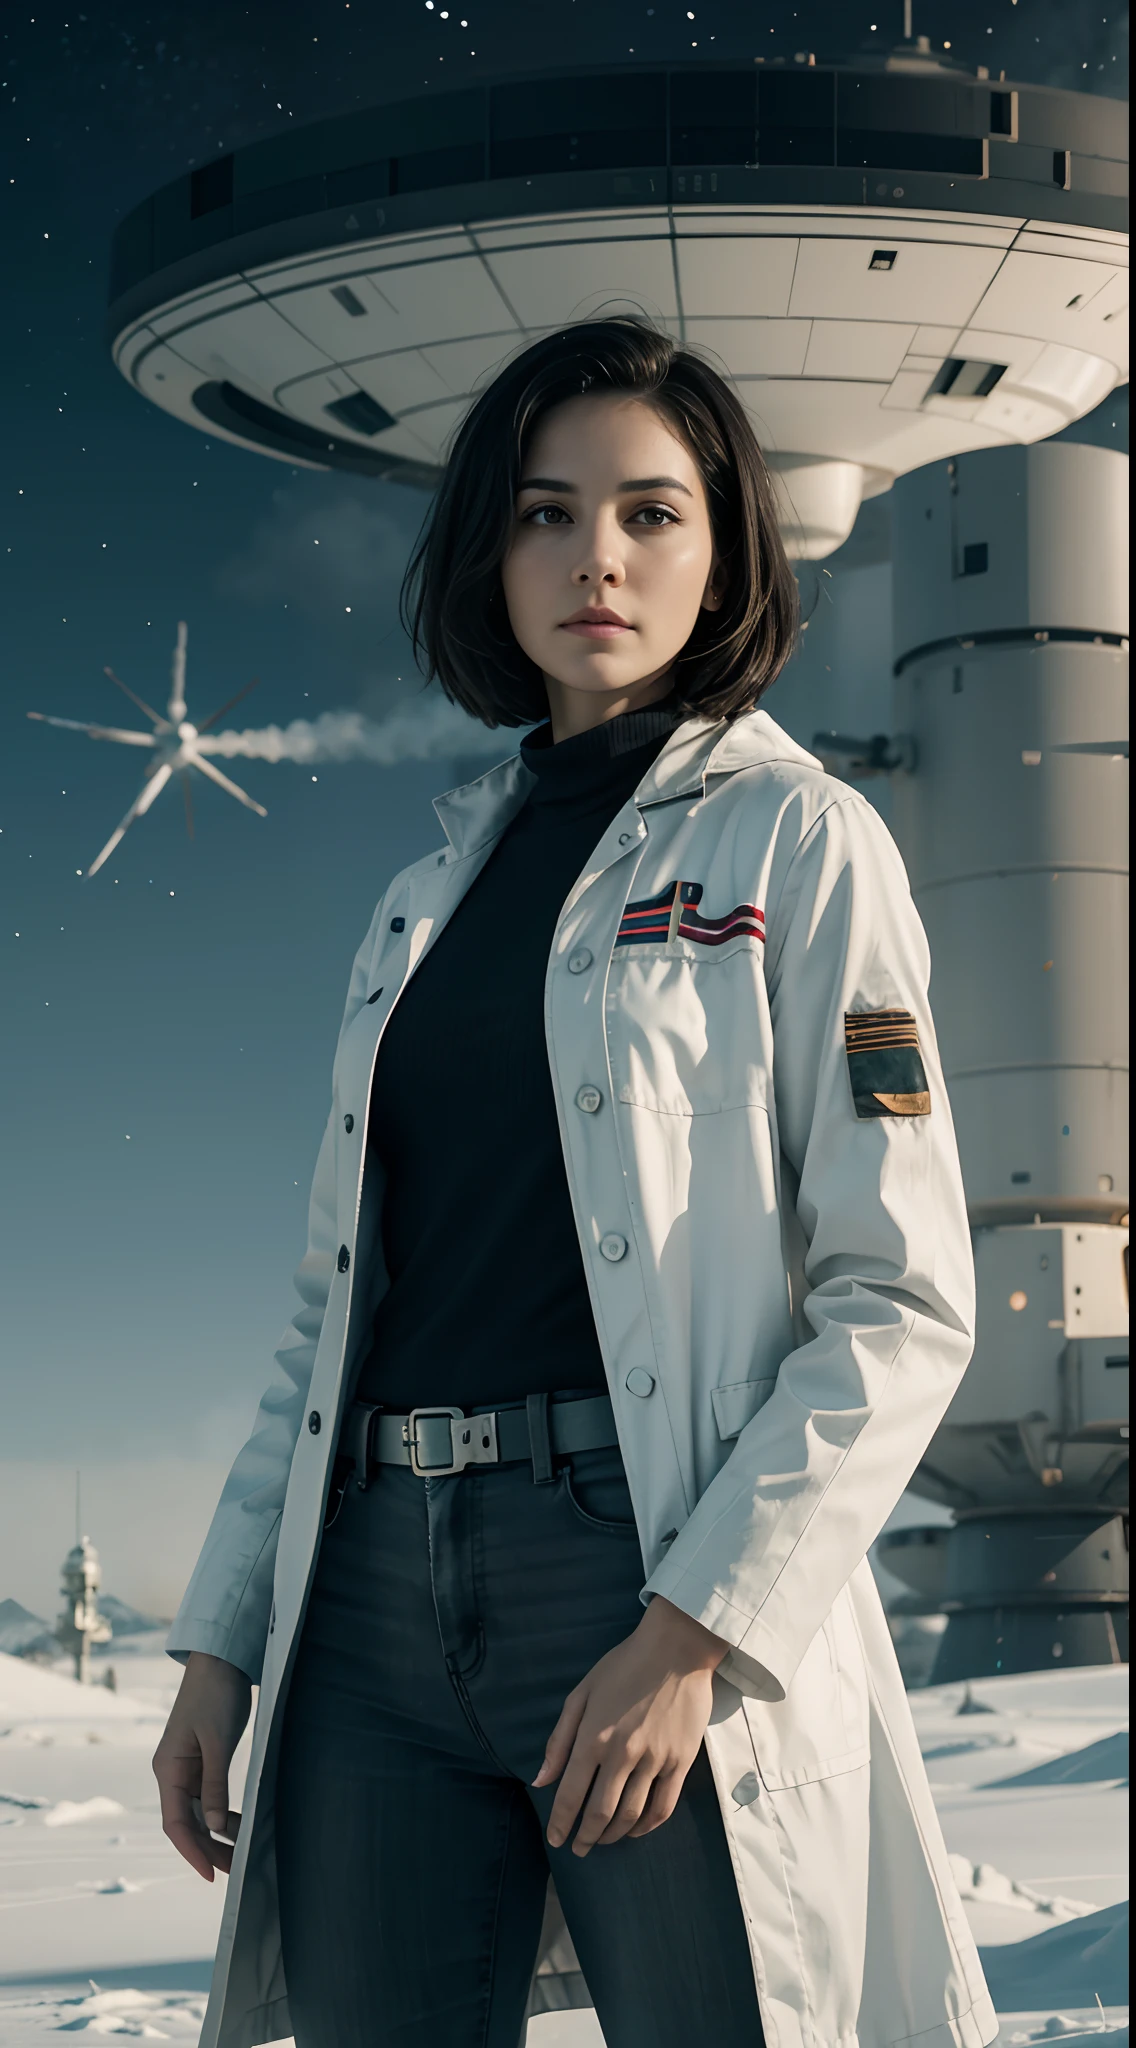 Ring World,Science Fiction,Sci-Fi Movies,Artillery, medium-Range Missiles,Based on the movie Foundation ,Woman,Adult,Protagonist,28 years old,hopeful face,brown eyes,short hairstyle,black hair with white gray,scientist uniform,white researcher coat,open meadow,rebel,chaotic,future world,world of socialism,snow,chaos